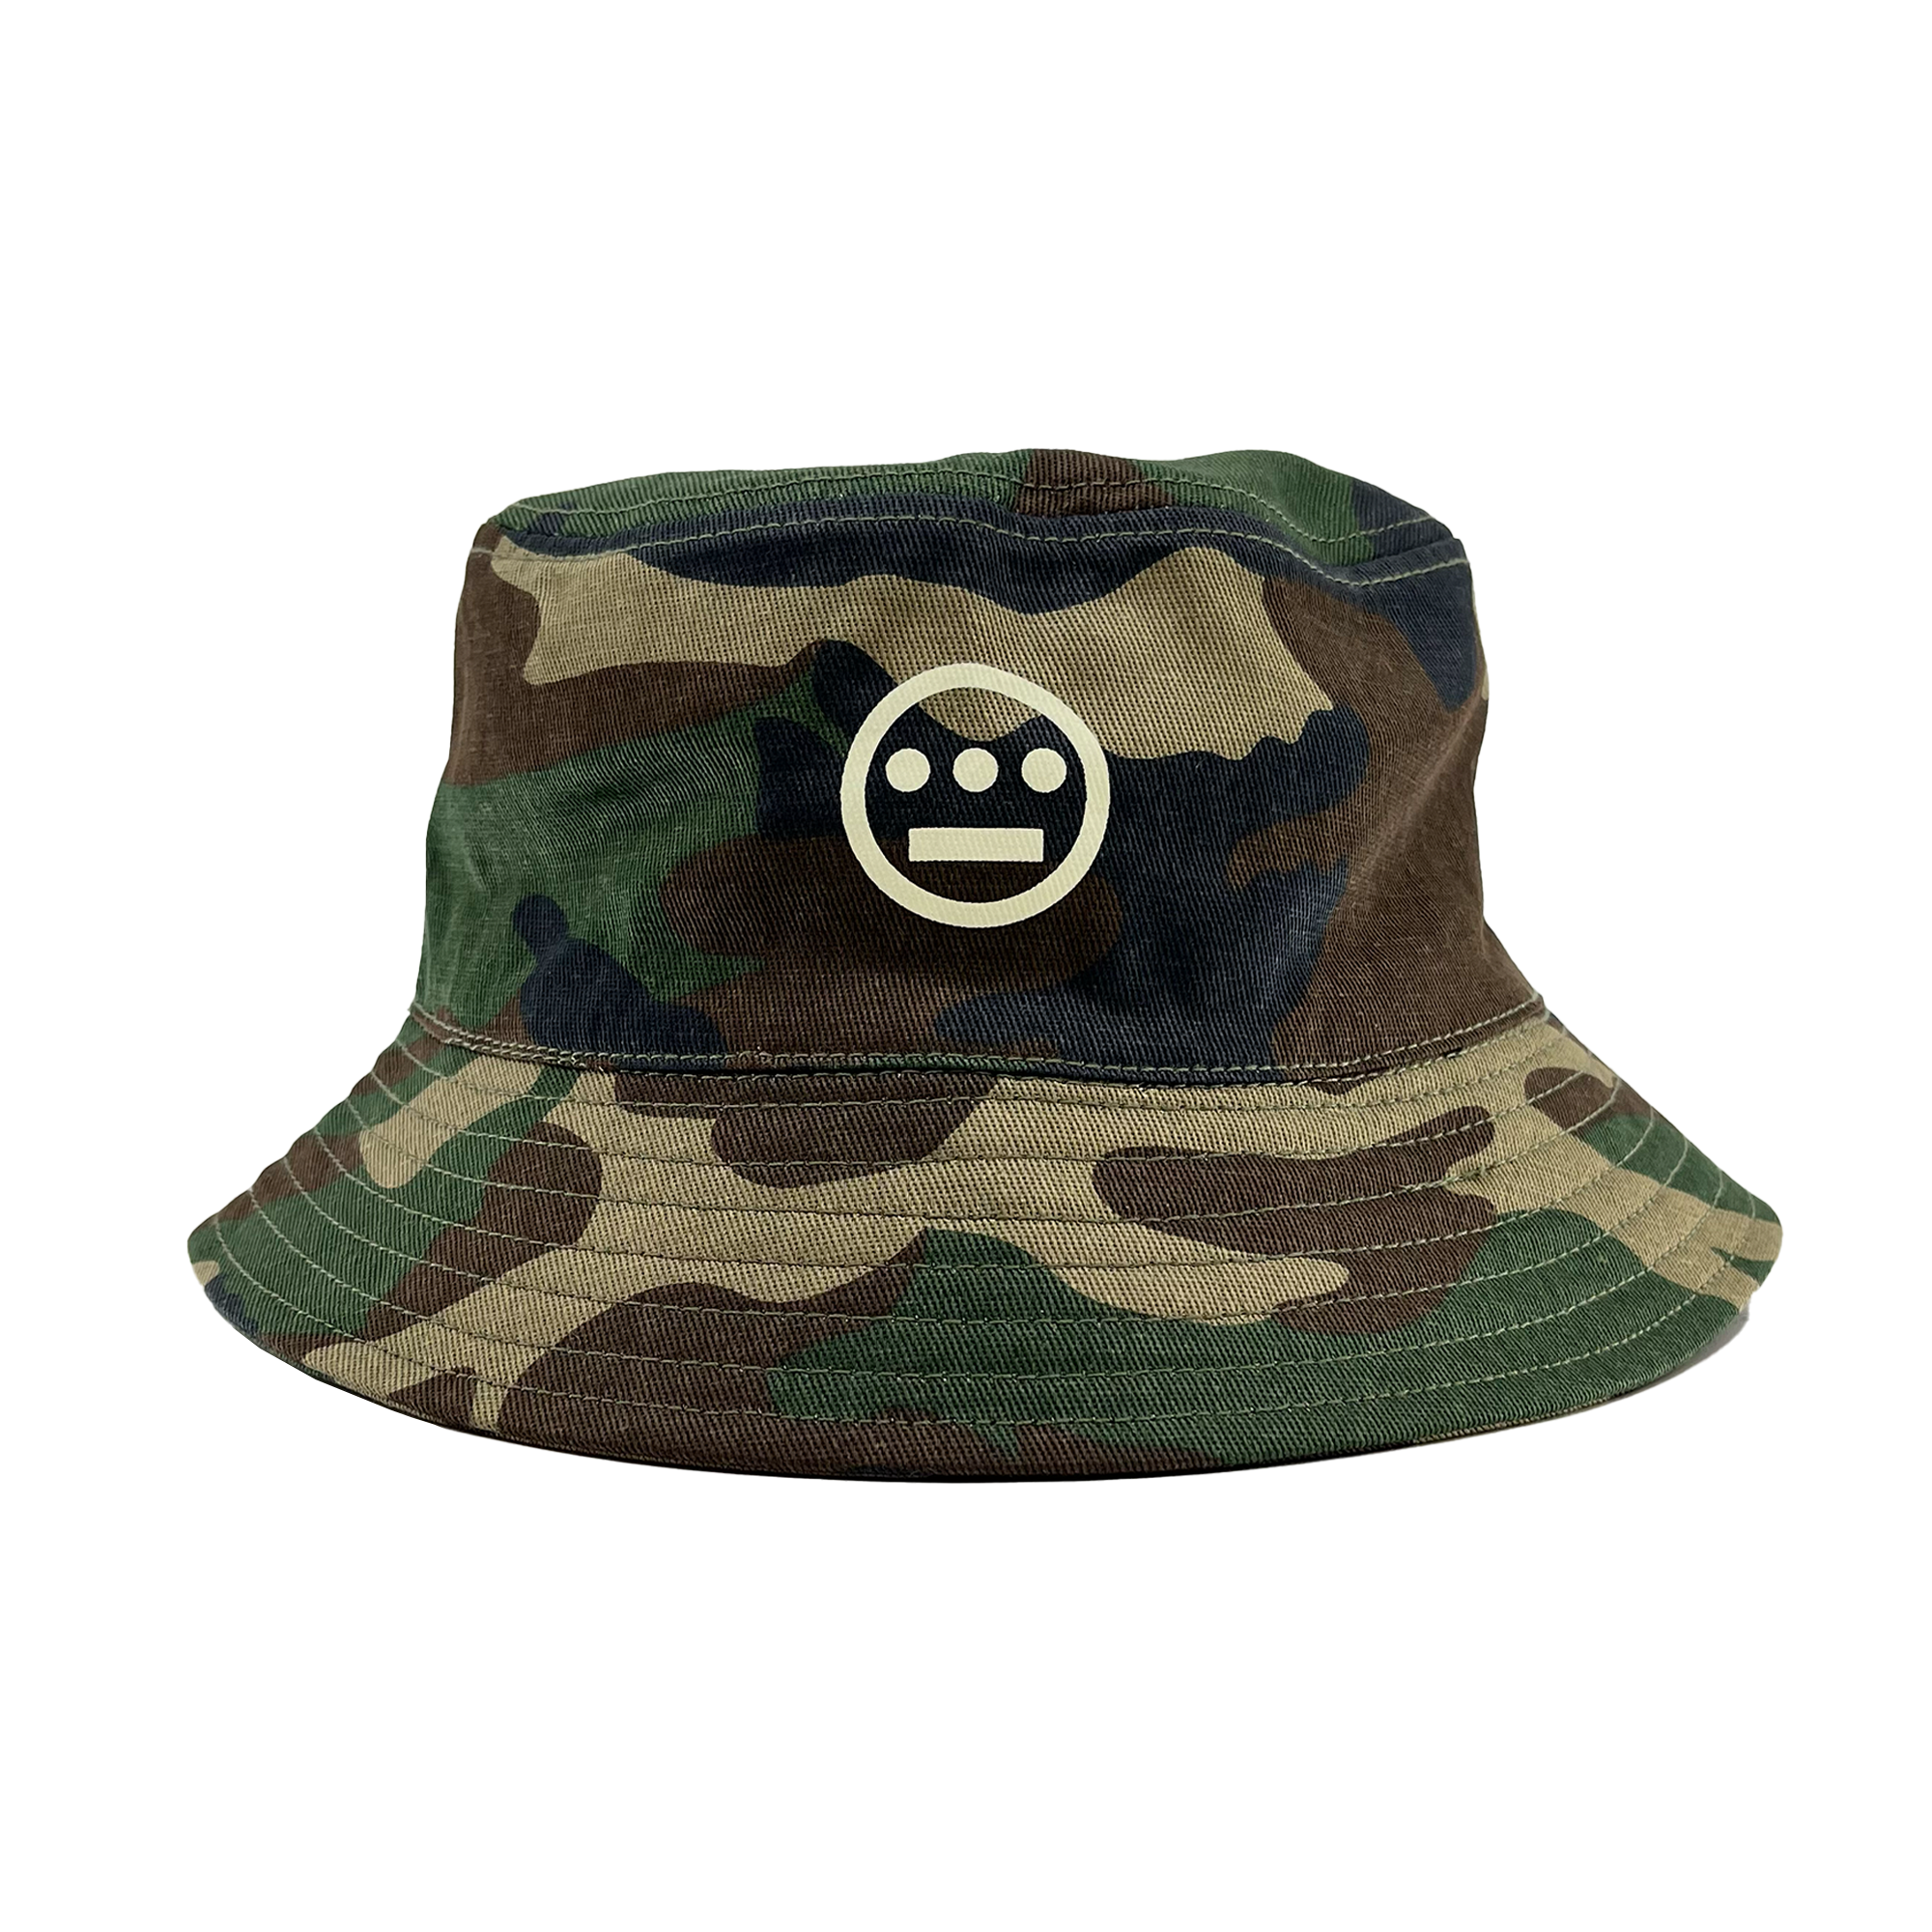 Woodland Camo bucket hat with Hieroglyphics Hip Hop Crew logo on the front crown. 